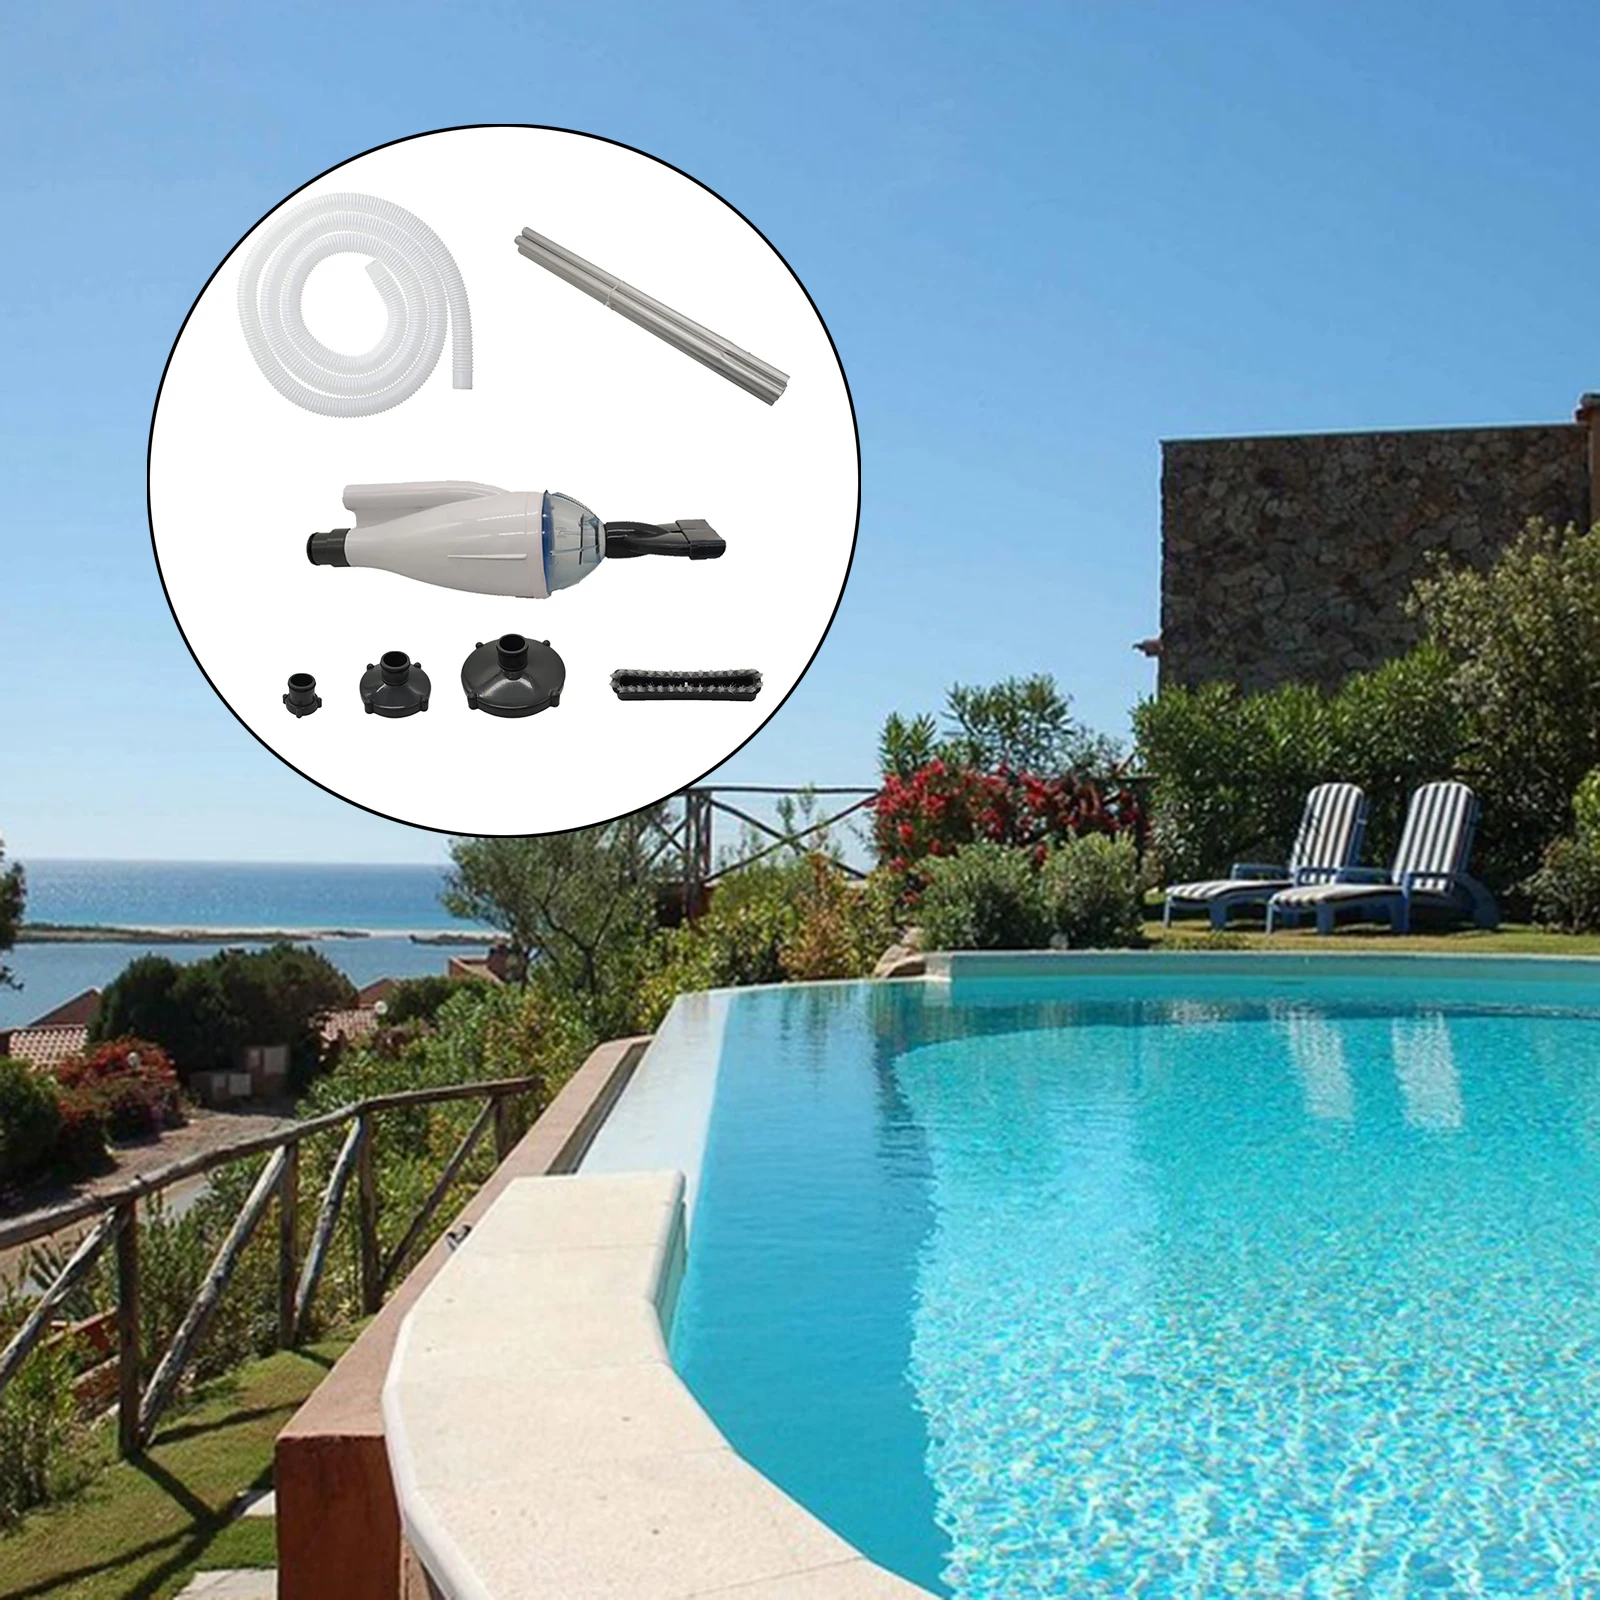 Hand Held Jet Vacuum Cleaner for Home Pools with 5M Hose Spa & Hot Tub Suction Vacuum Cleaner